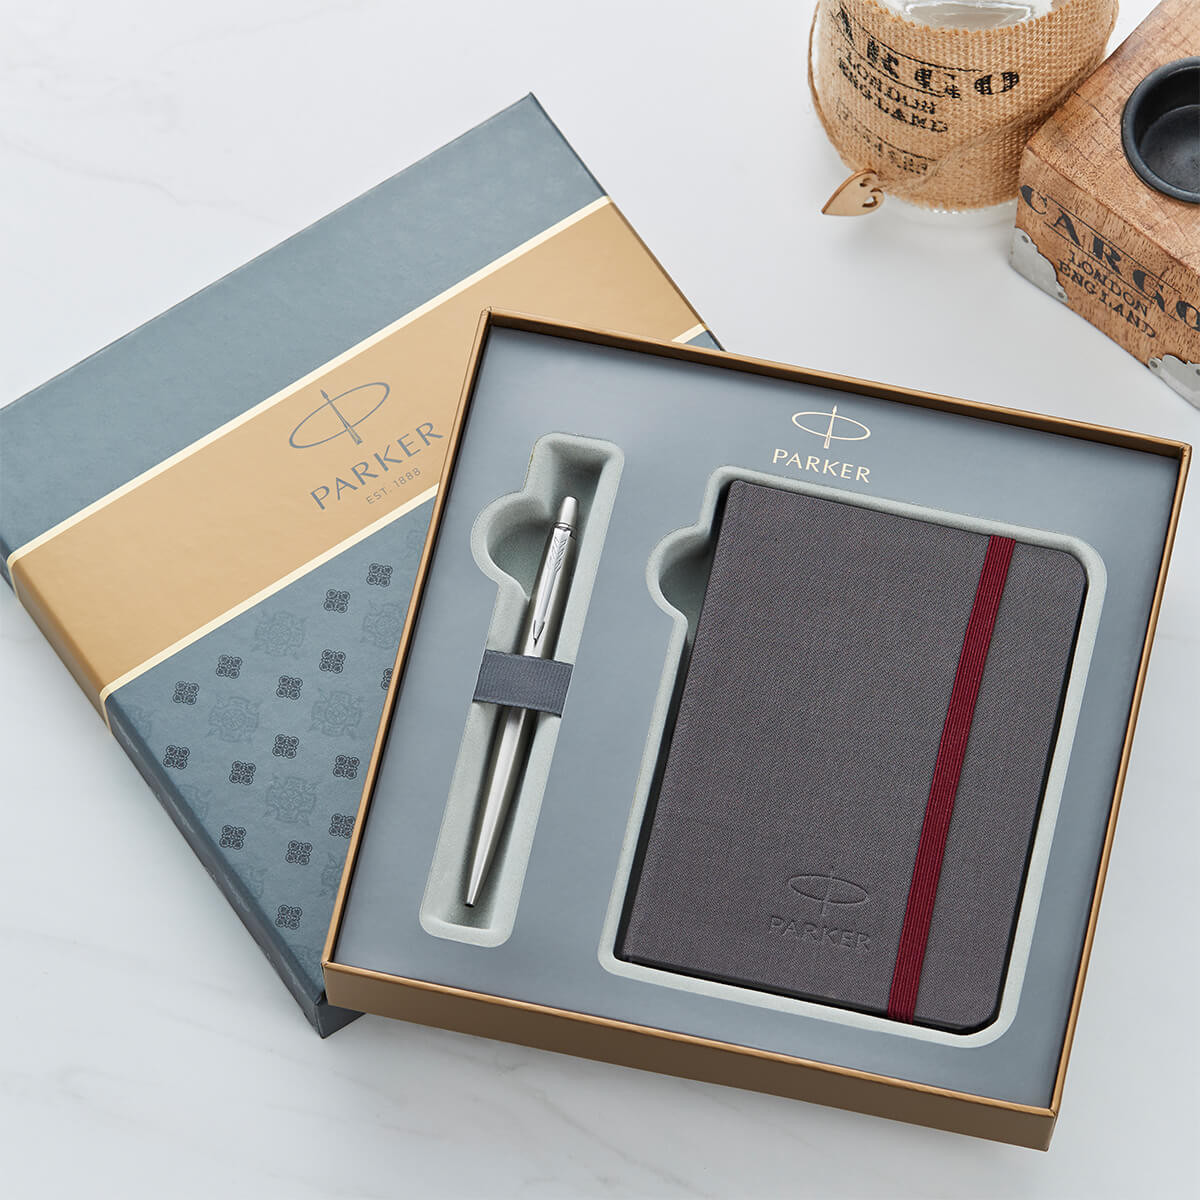 Personalised parker pen and notepad gift set